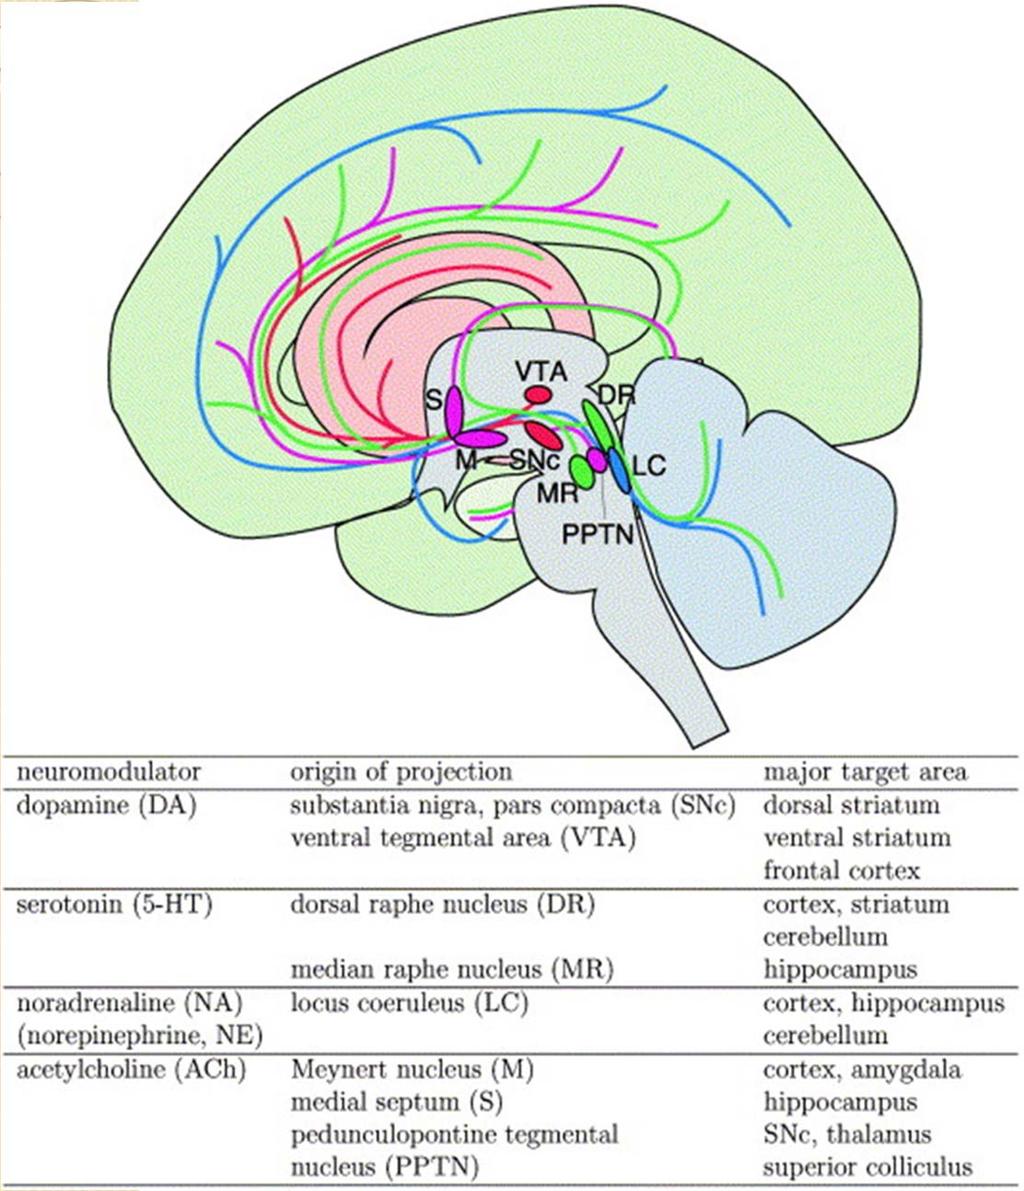 Neuromodulatory Nuclei Modulate neuronal activity over large parts of the entire brain.